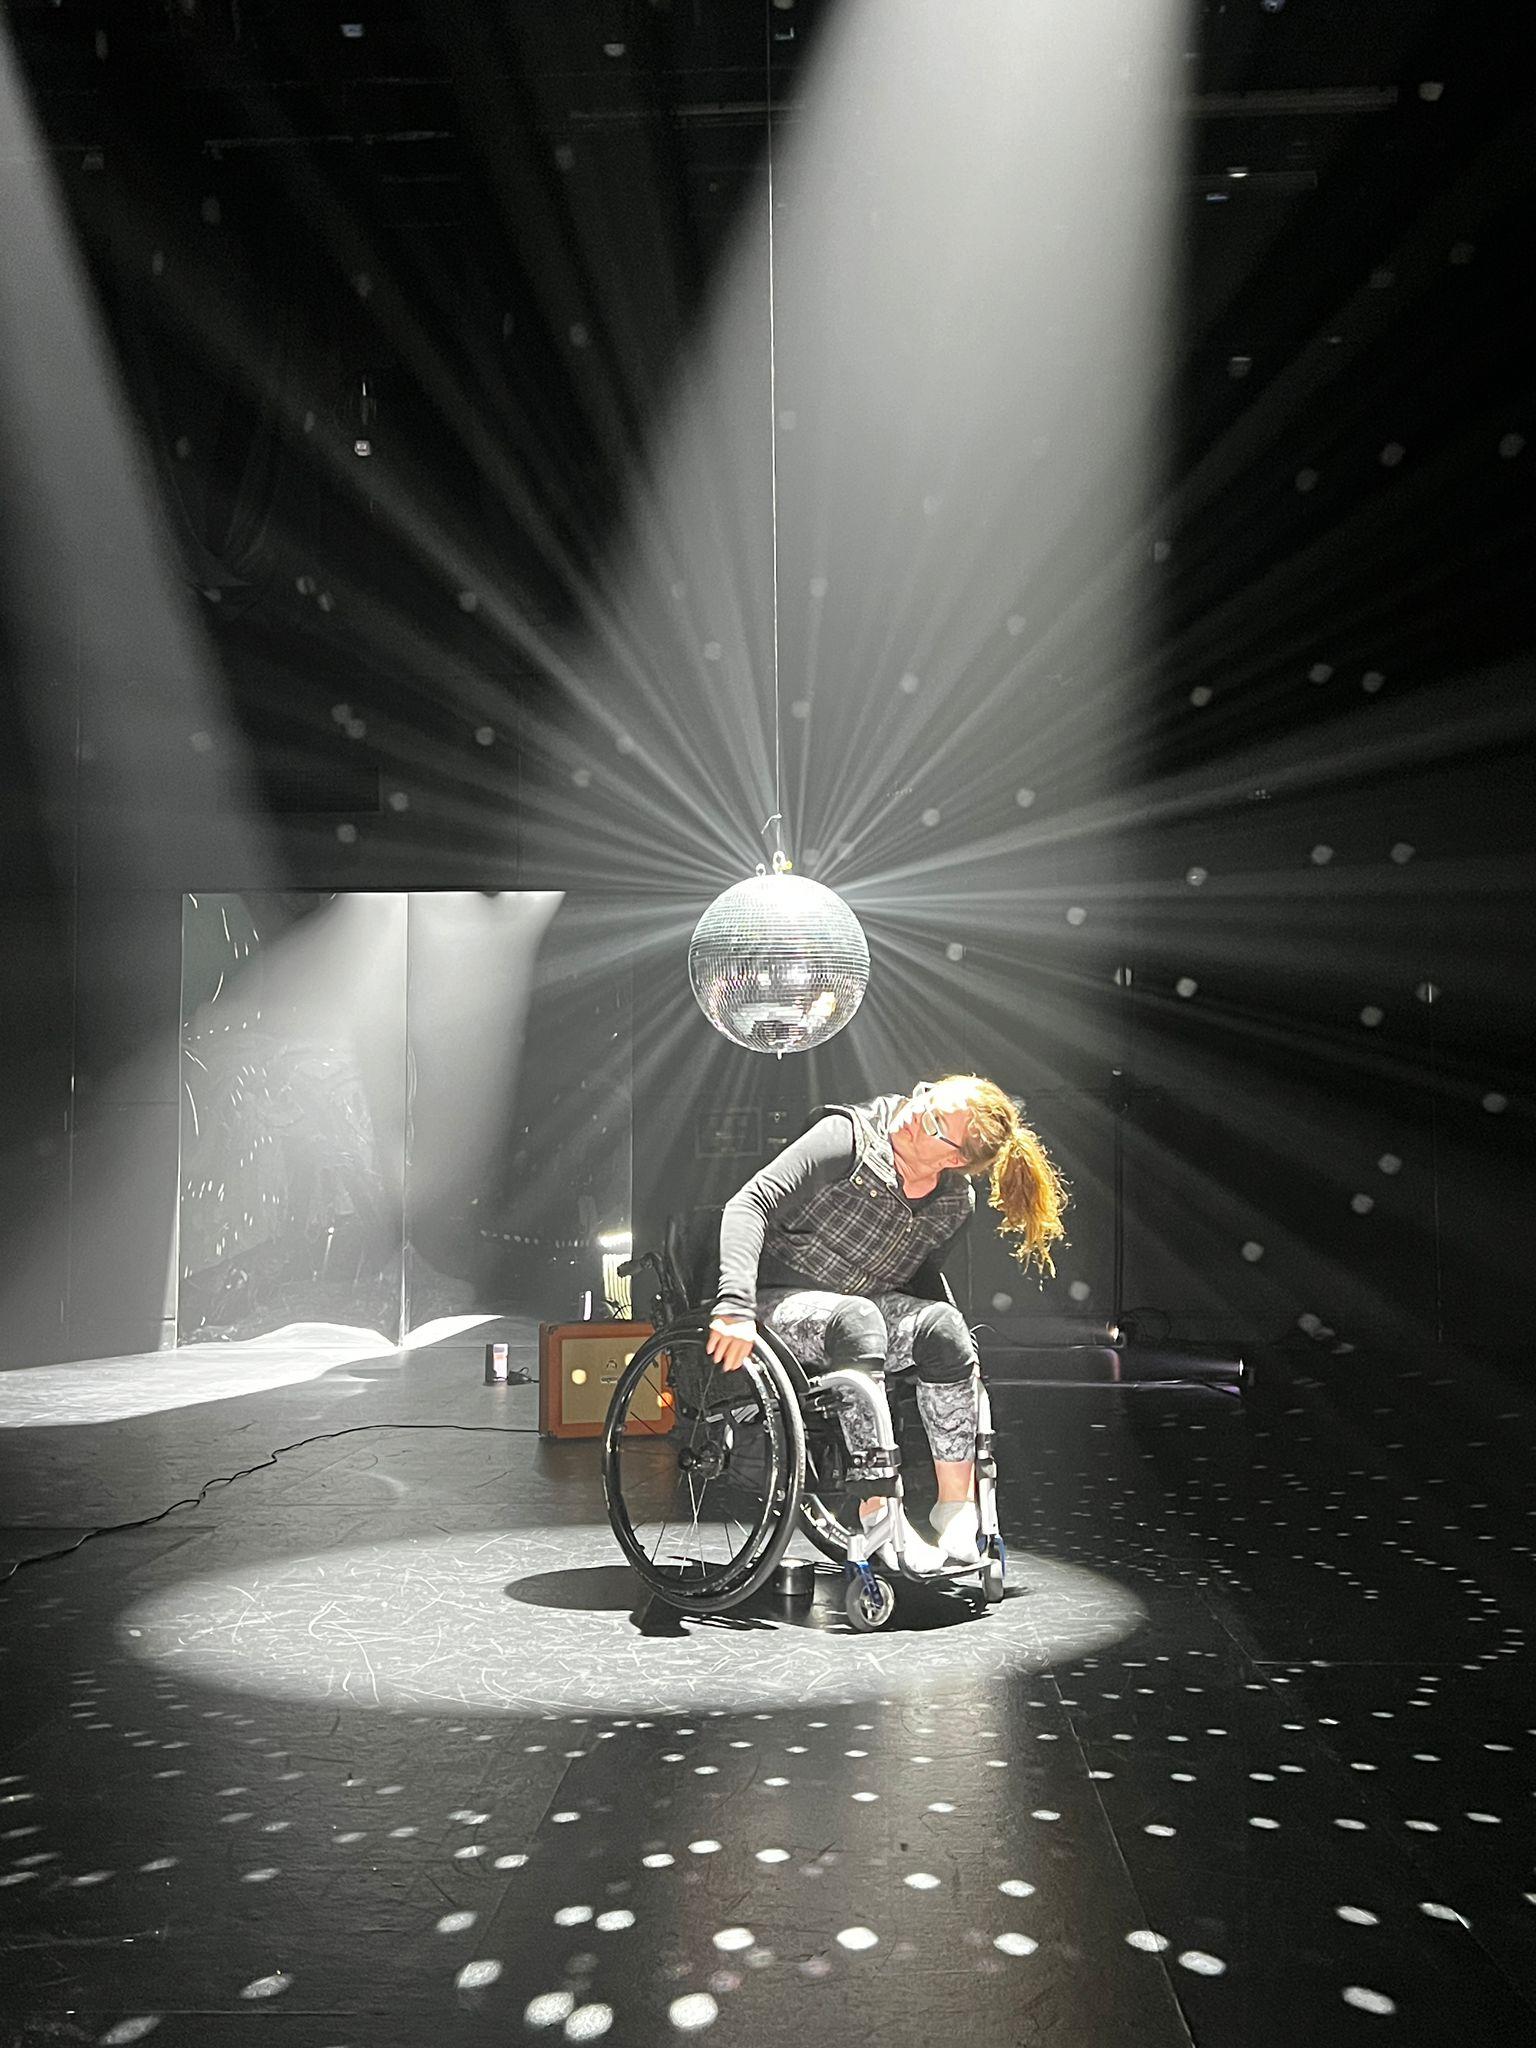 Alisha McLennan Marler, a light-skinned female in a dark top and black and white mottled leggings, sits in a wheelchair in a darkened dance studio, scuffmarks on its black floors, walls black, lights down. She dances around a suspended discoball, didging her head this way and that, as she circles around the base of the ball, watching her reflection. Hundreds of rays of light cut through the hazy room. creating white dots on the walls and floors, in all directions.